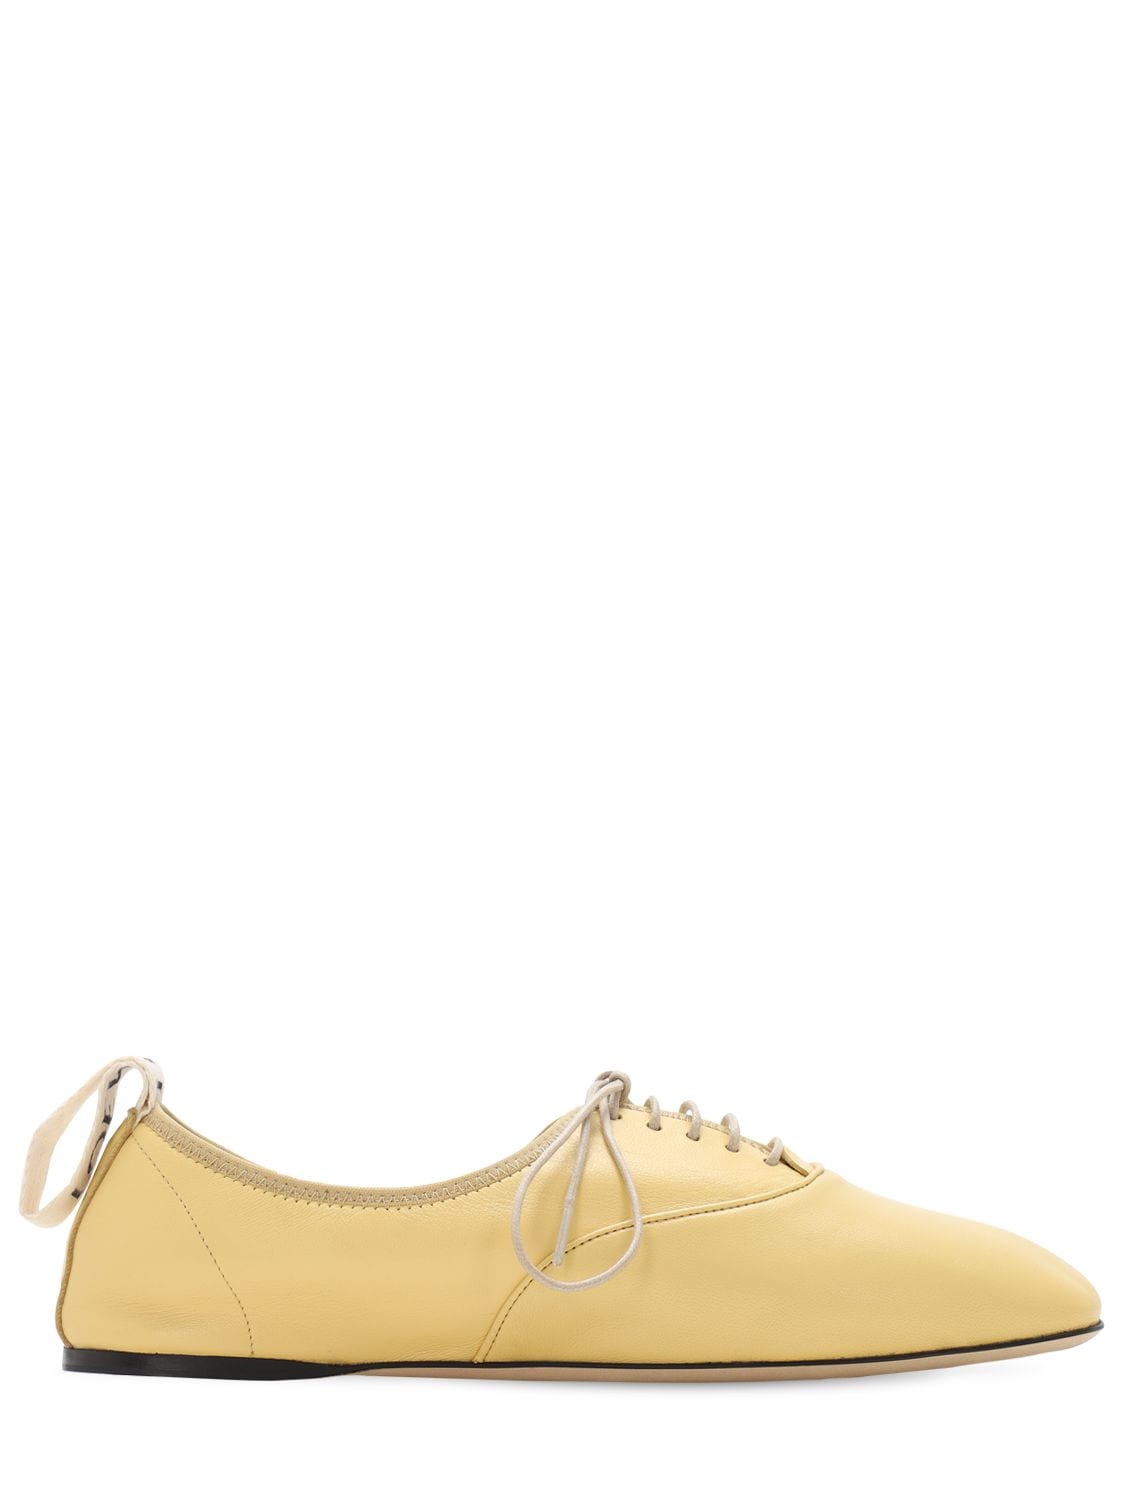 LOEWE 10MM SOFT LEATHER LACE-UP DERBY FLATS,70IWAS004-ODE0MA2